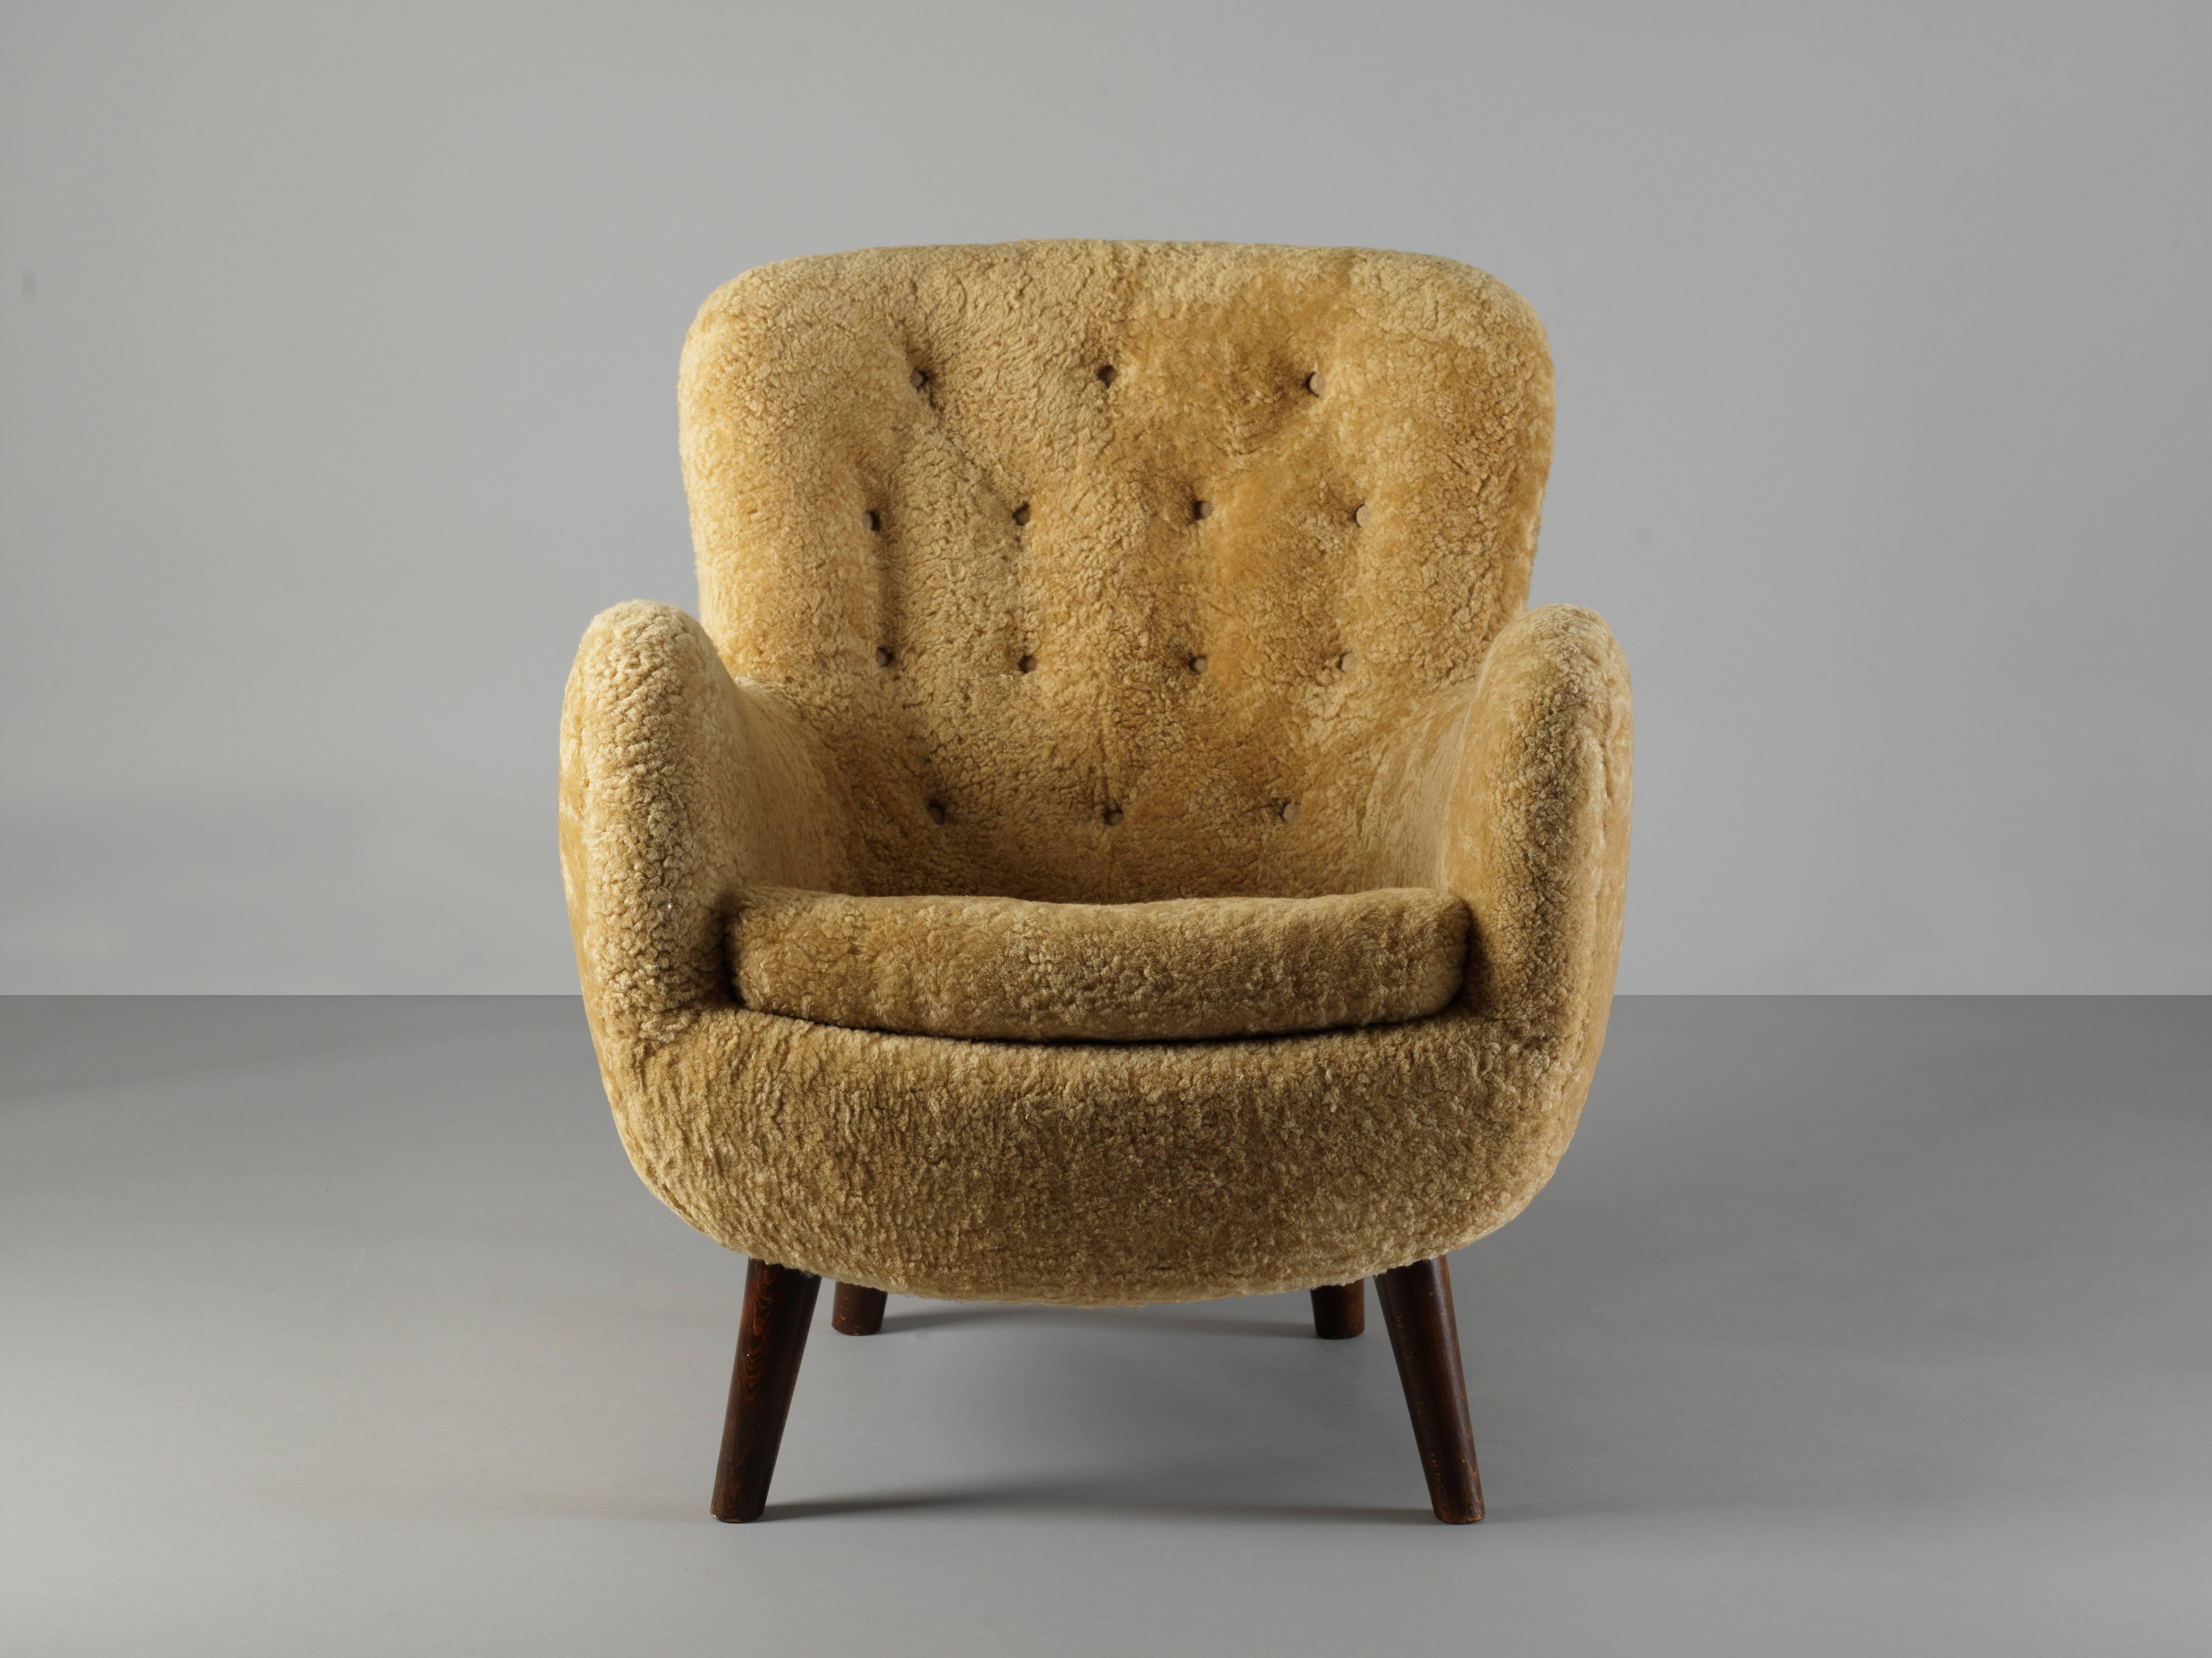 Stained Frits Schlegel 'Attributed', Organic Lounge Chair, Natural Beige Lambskin, 1940s